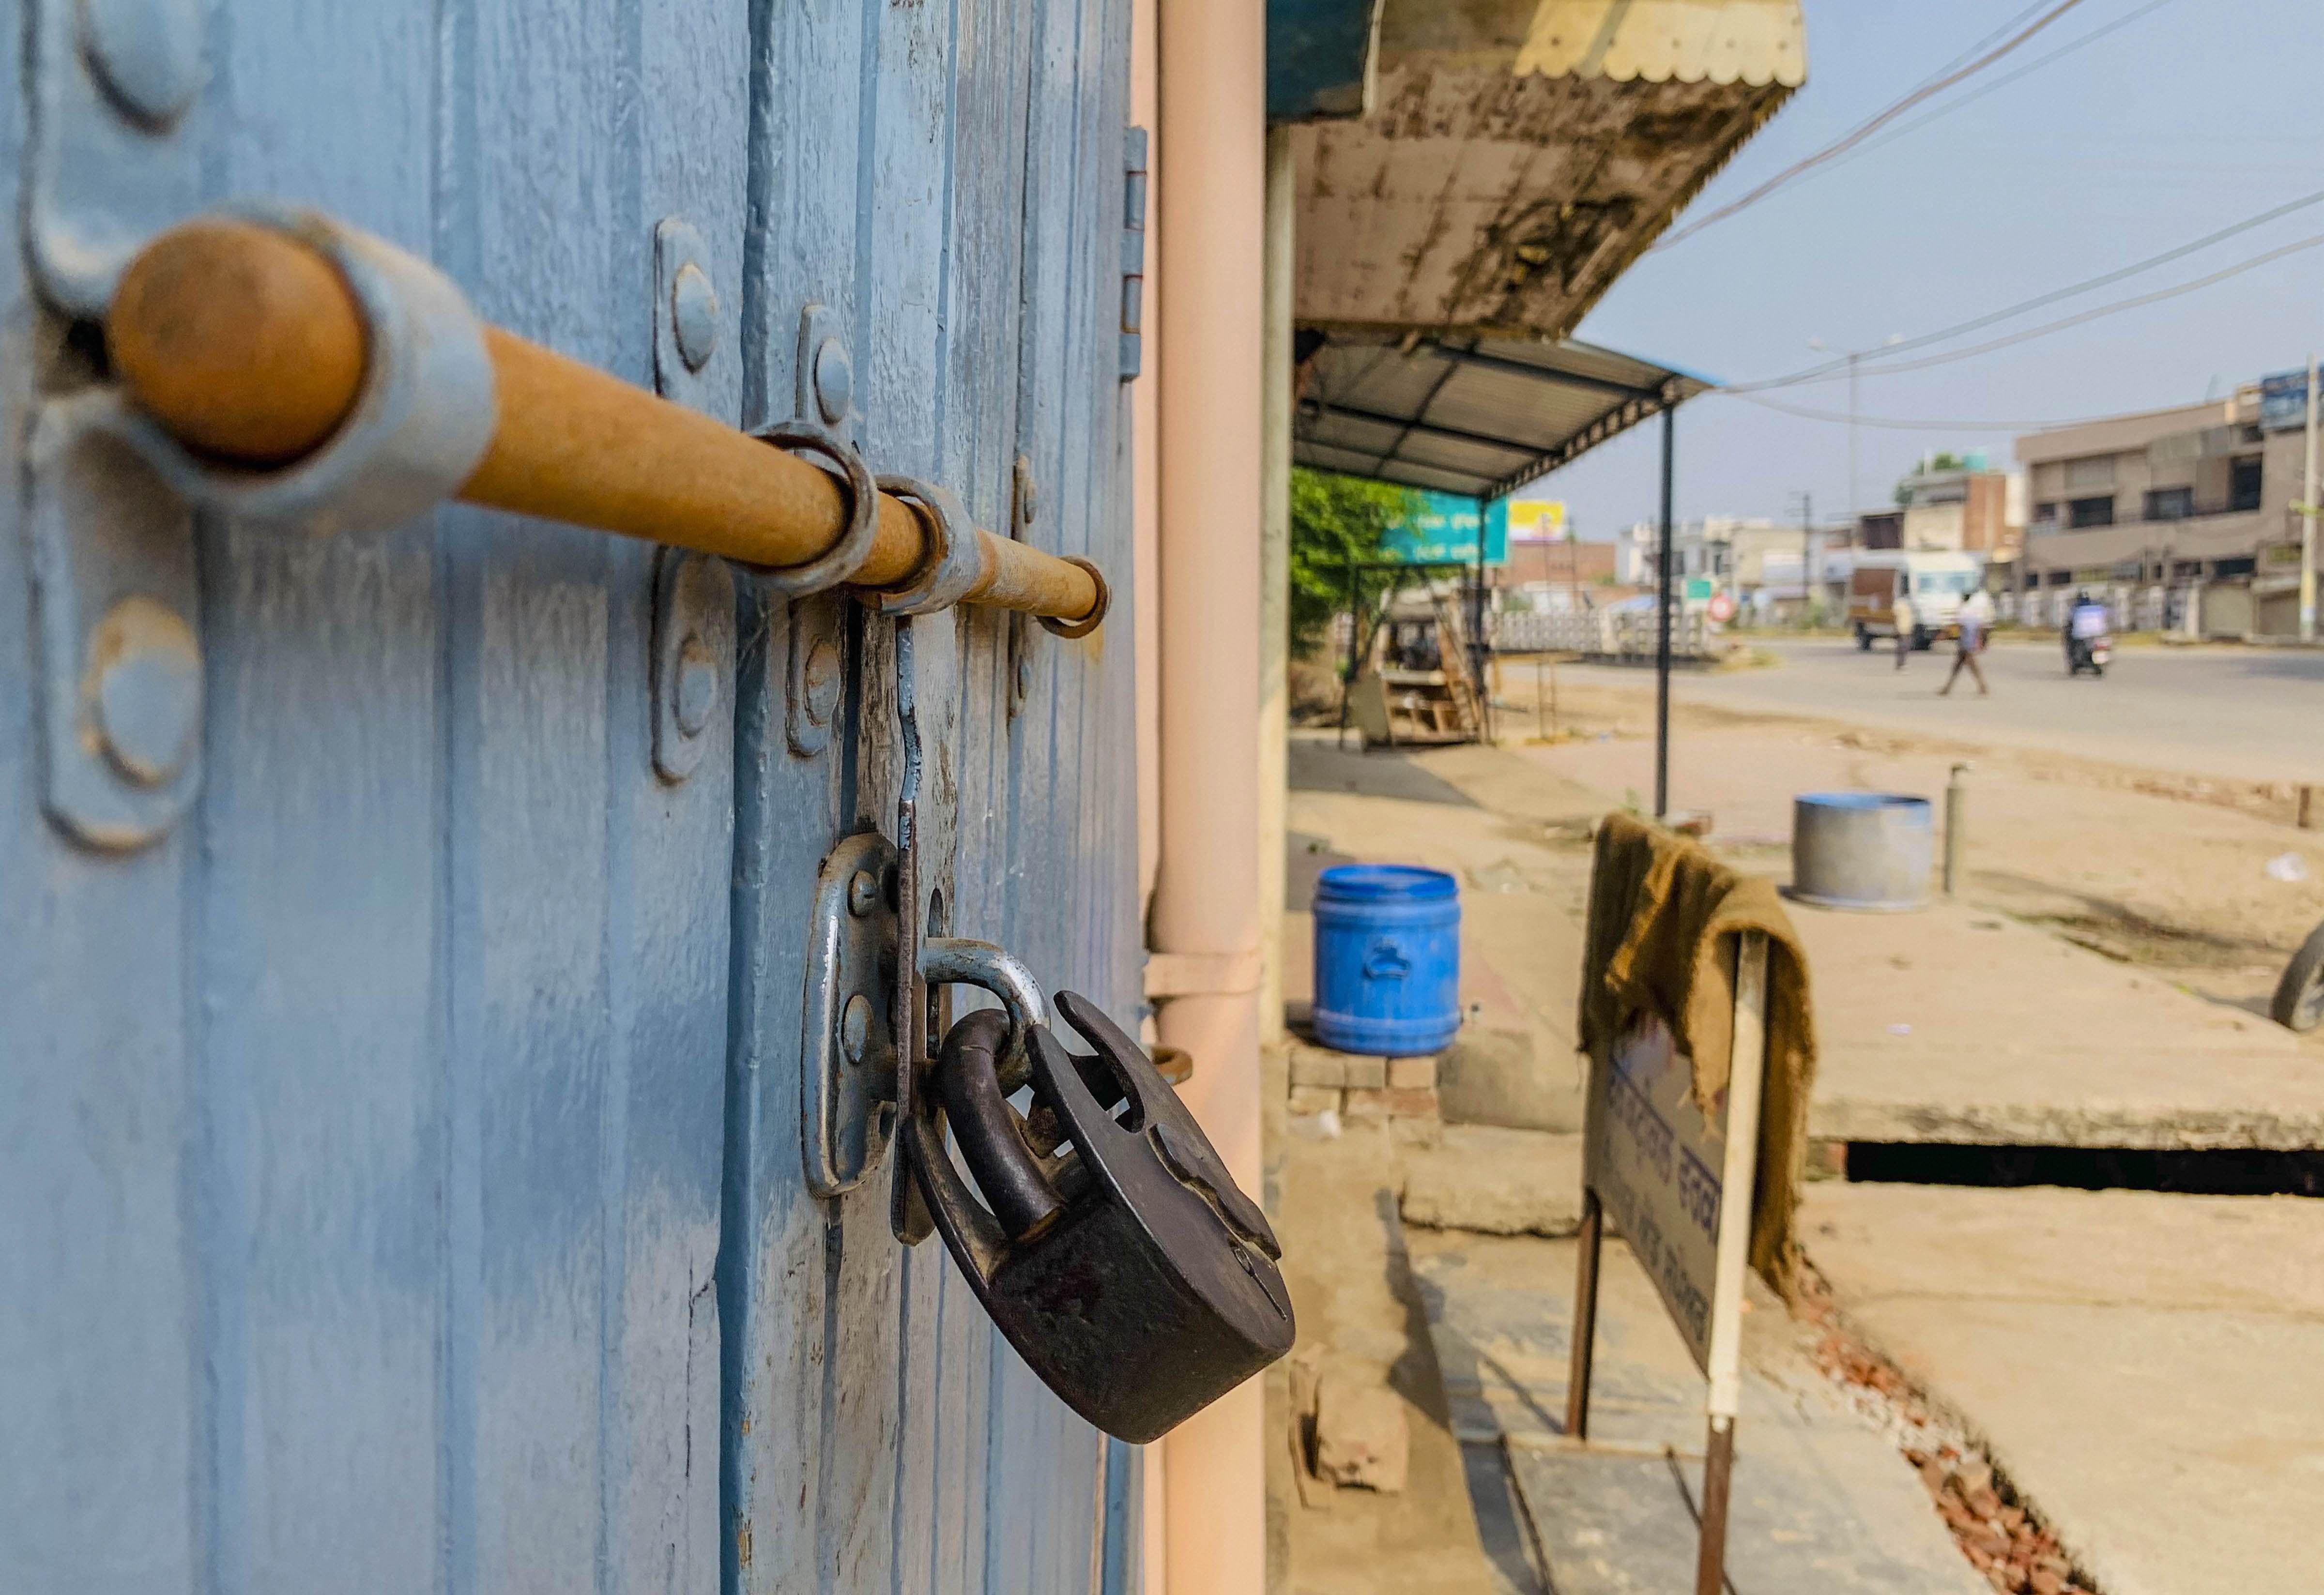 Kurali: A shop is locked during 'Bharat Bandh', a protest against the farm bills passed in Parliament recently, in Kurali, Friday, Sept. 25, 2020. (PTI Photo)(PTI25-09-2020_000040B)